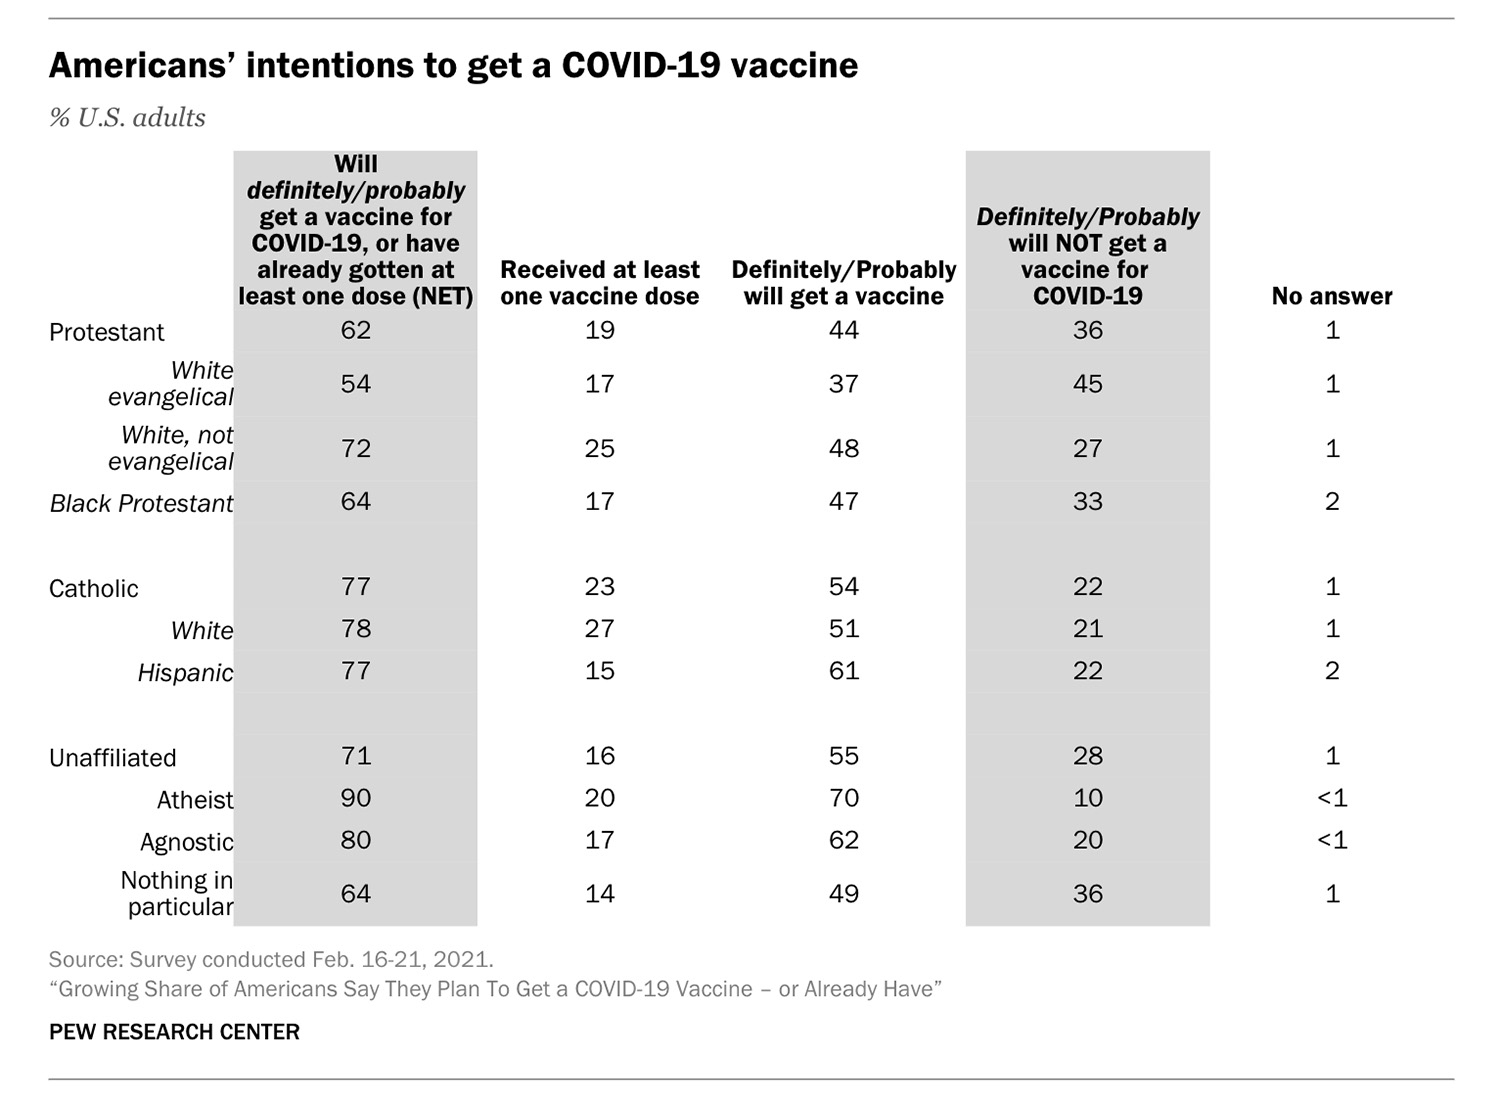 “Americans’ intentions to get a COVID-19 vaccine” Graphic courtesy of Pew Research Center